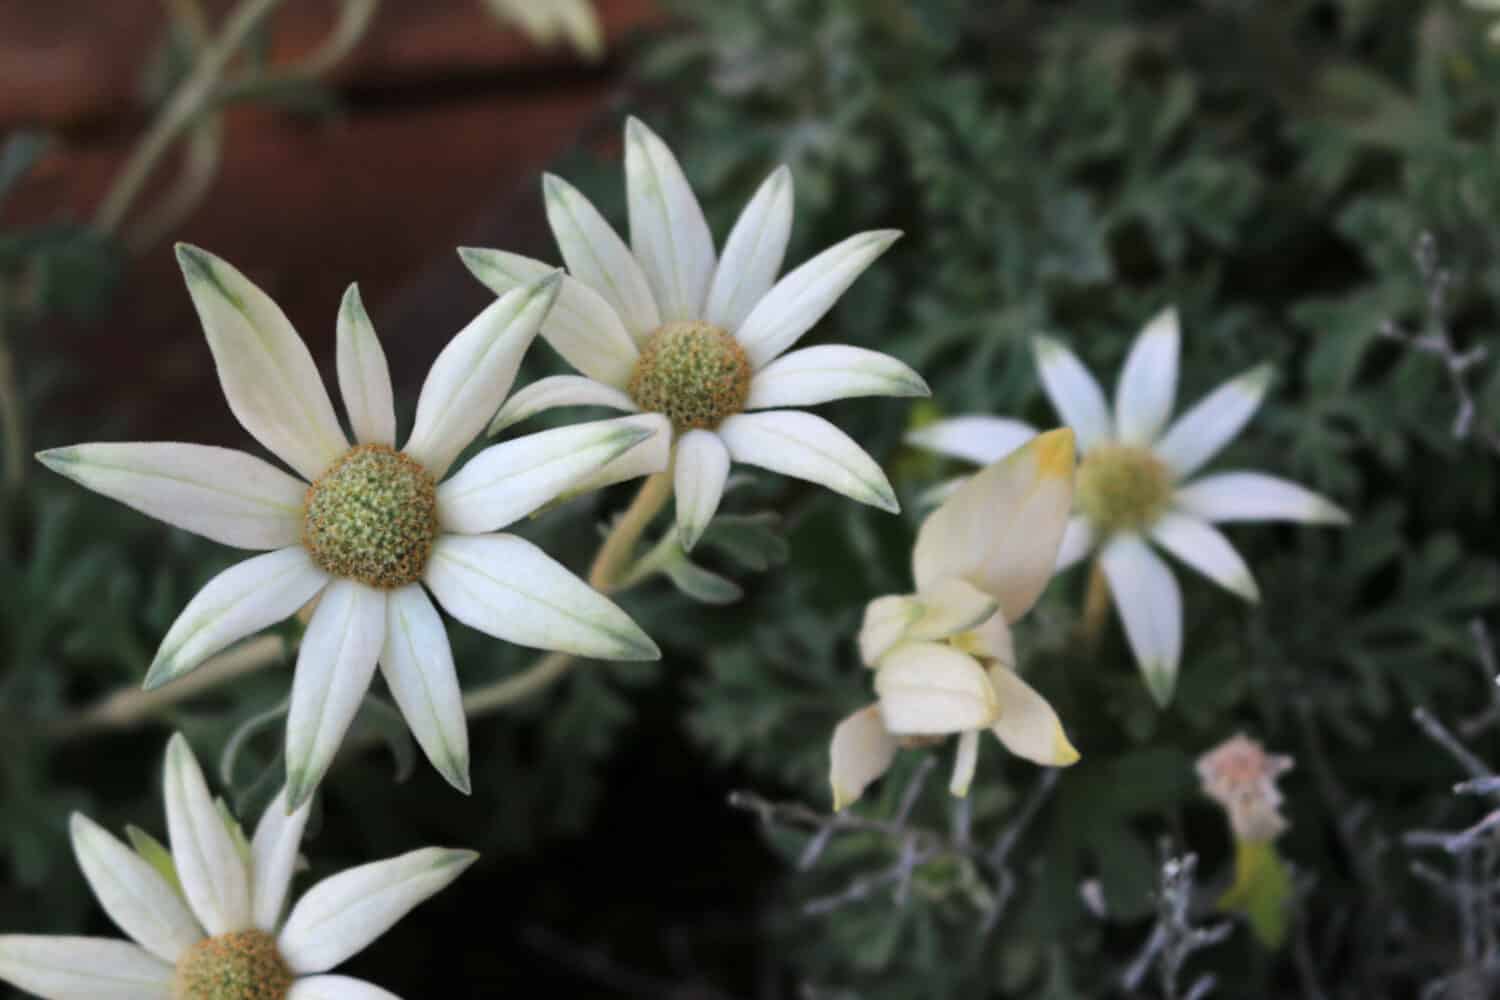 White flowers of Actinotus helianthi called "Flannel flower" blooming in the flowerbed of winter